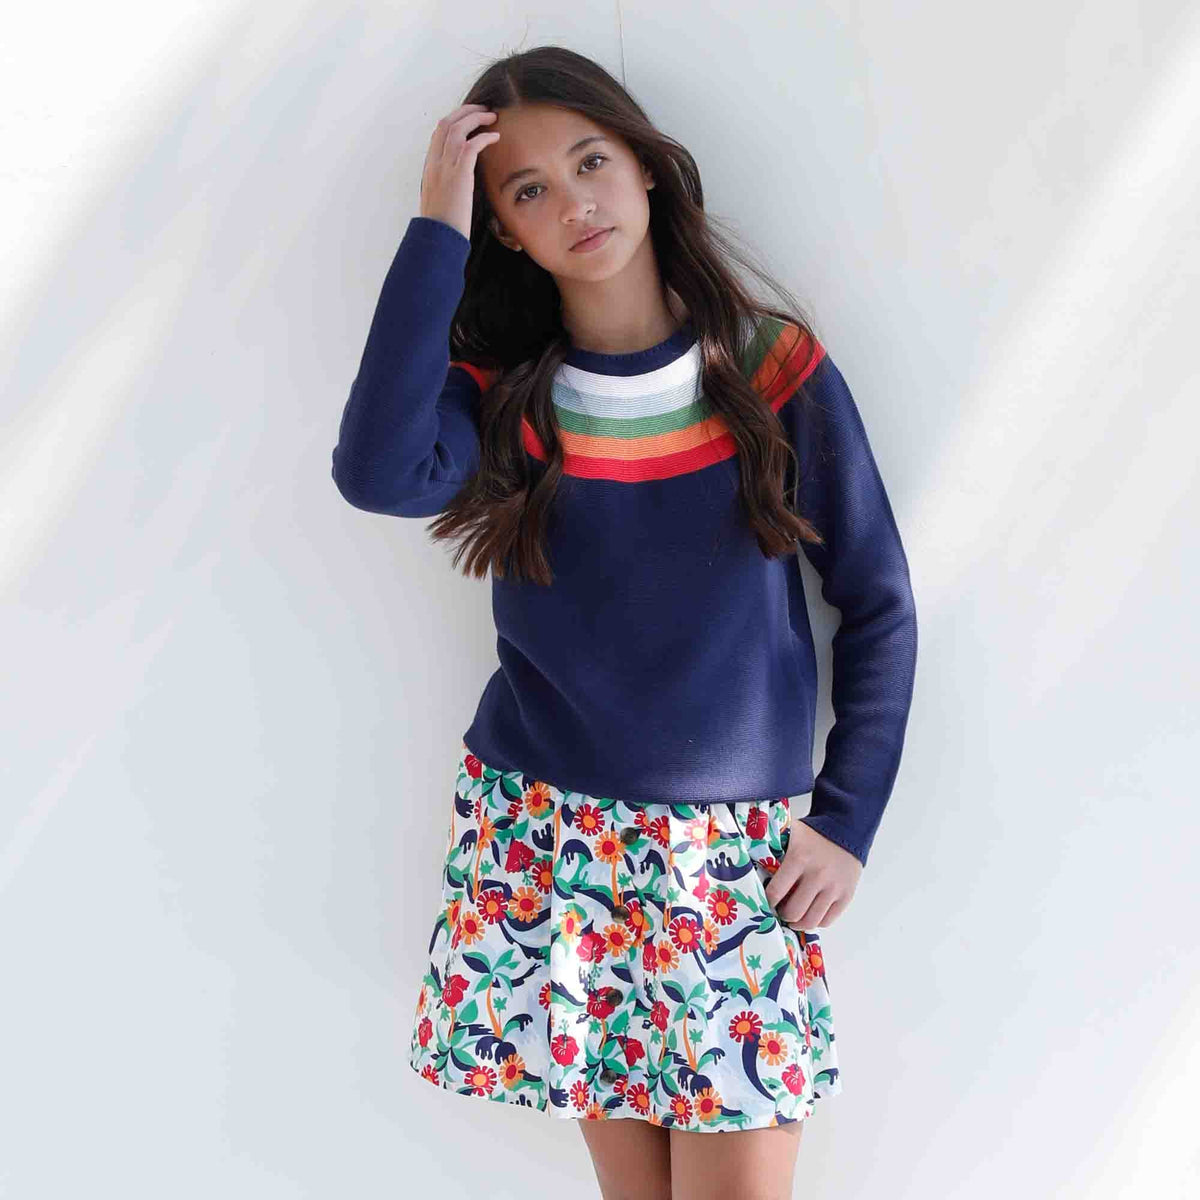 Classic and Preppy Audrey Scallop Skirt, Olina Print-Bottoms-CPC - Classic Prep Childrenswear